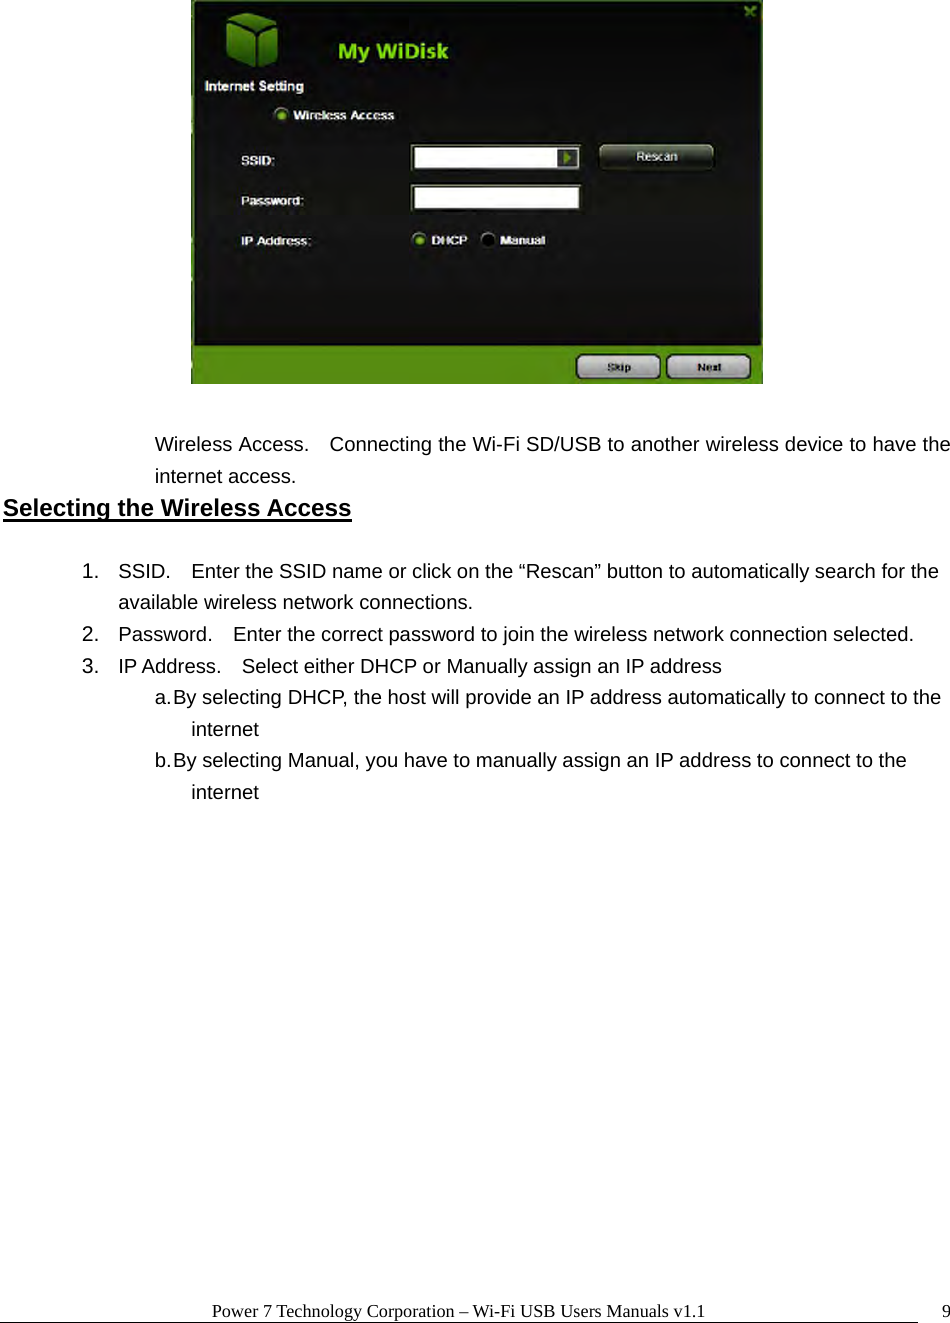 Power 7 Technology Corporation – Wi-Fi USB Users Manuals v1.1  9  Wireless Access.    Connecting the Wi-Fi SD/USB to another wireless device to have the internet access. Selecting the Wireless Access  1.  SSID.    Enter the SSID name or click on the “Rescan” button to automatically search for the available wireless network connections. 2.  Password.    Enter the correct password to join the wireless network connection selected.     3.  IP Address.    Select either DHCP or Manually assign an IP address a. By selecting DHCP, the host will provide an IP address automatically to connect to the internet b. By selecting Manual, you have to manually assign an IP address to connect to the internet   